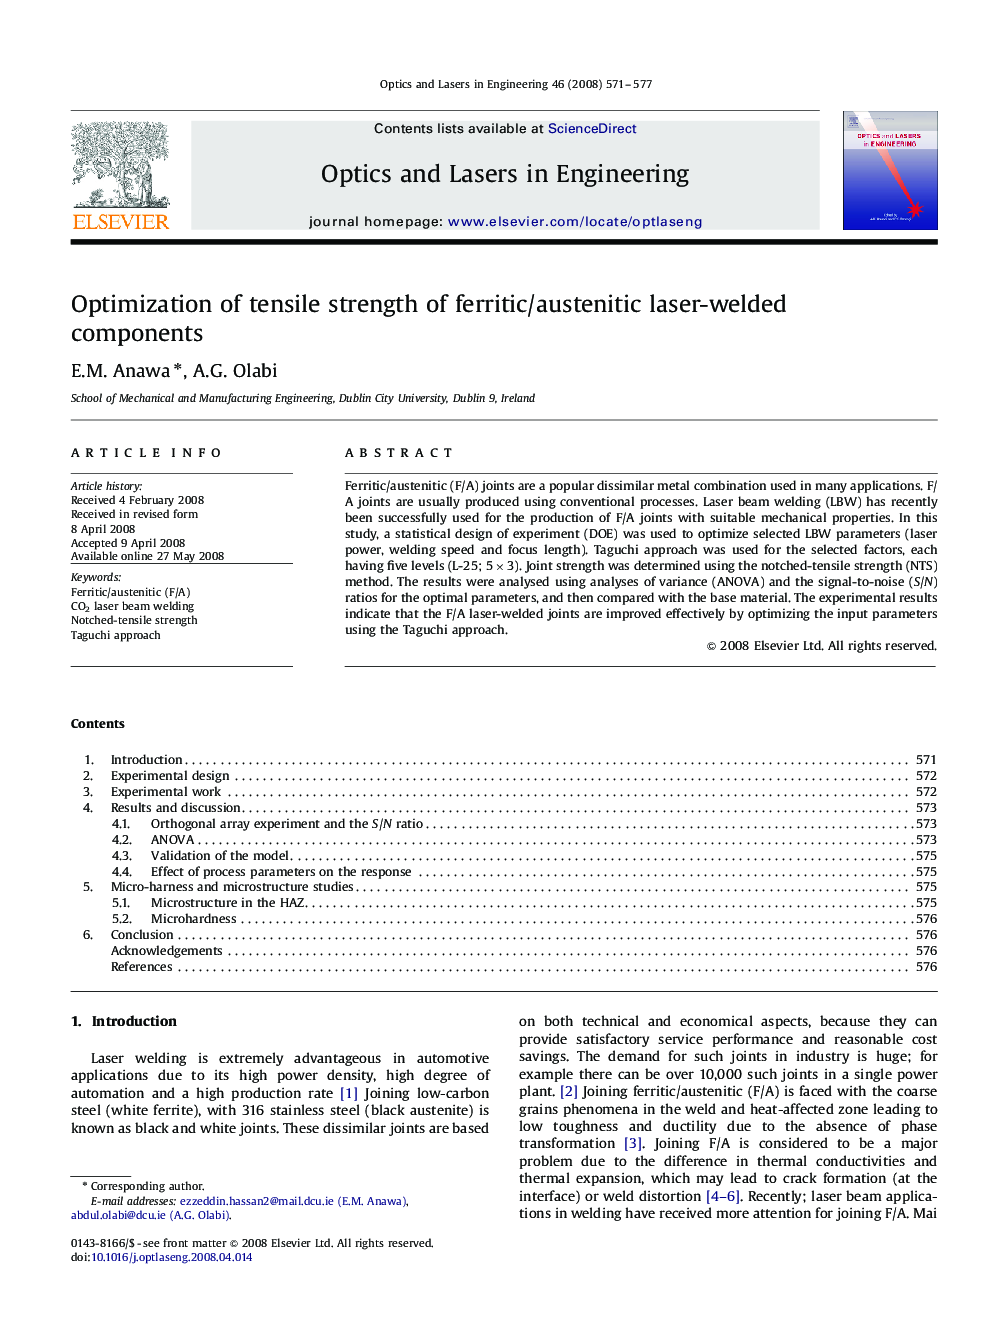 Optimization of tensile strength of ferritic/austenitic laser-welded components